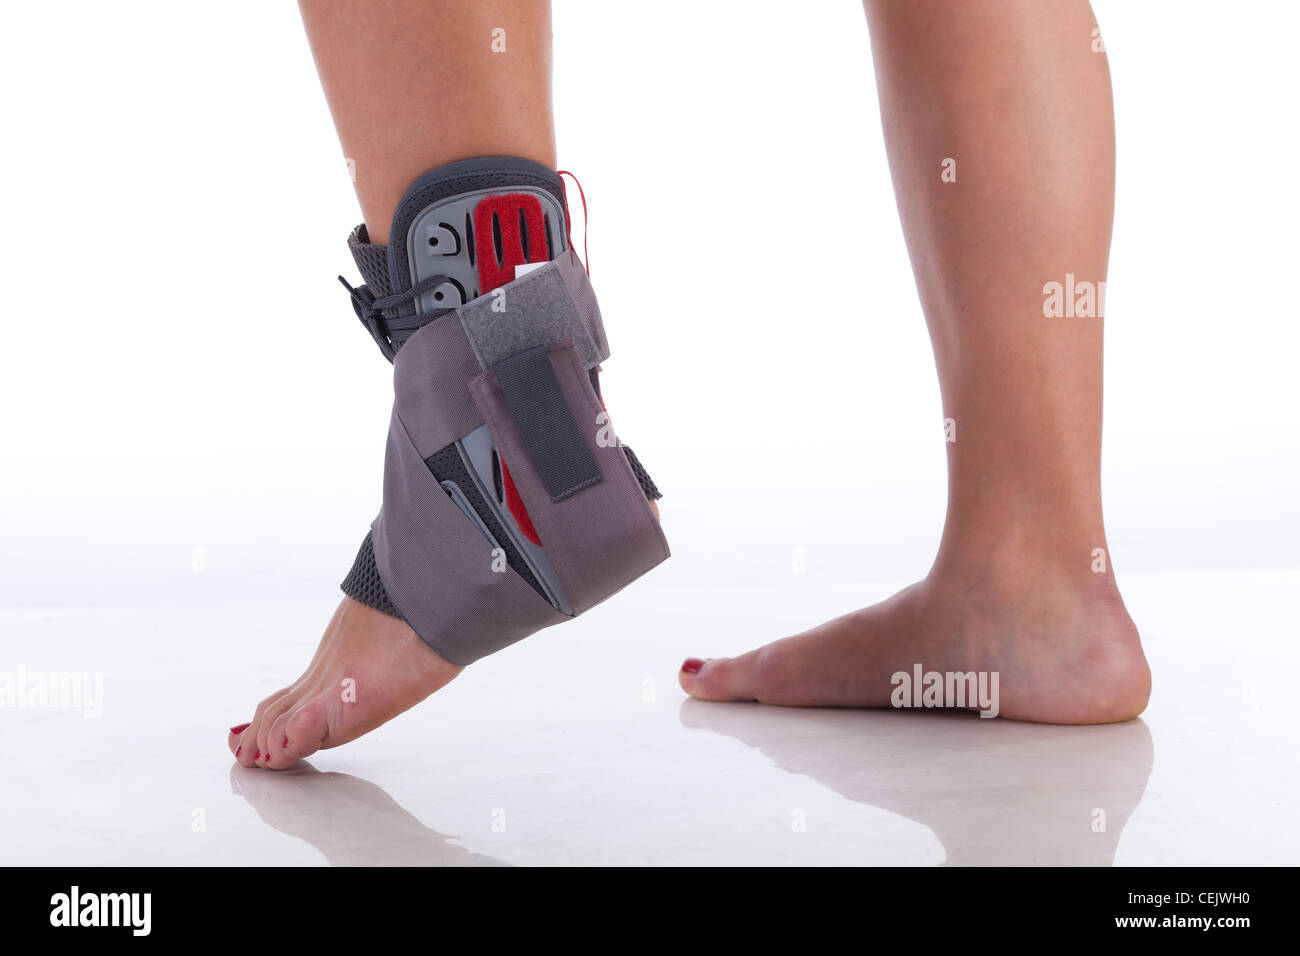 Foot Wrapped in a Ankle Brace on White with reflection Stock Photo